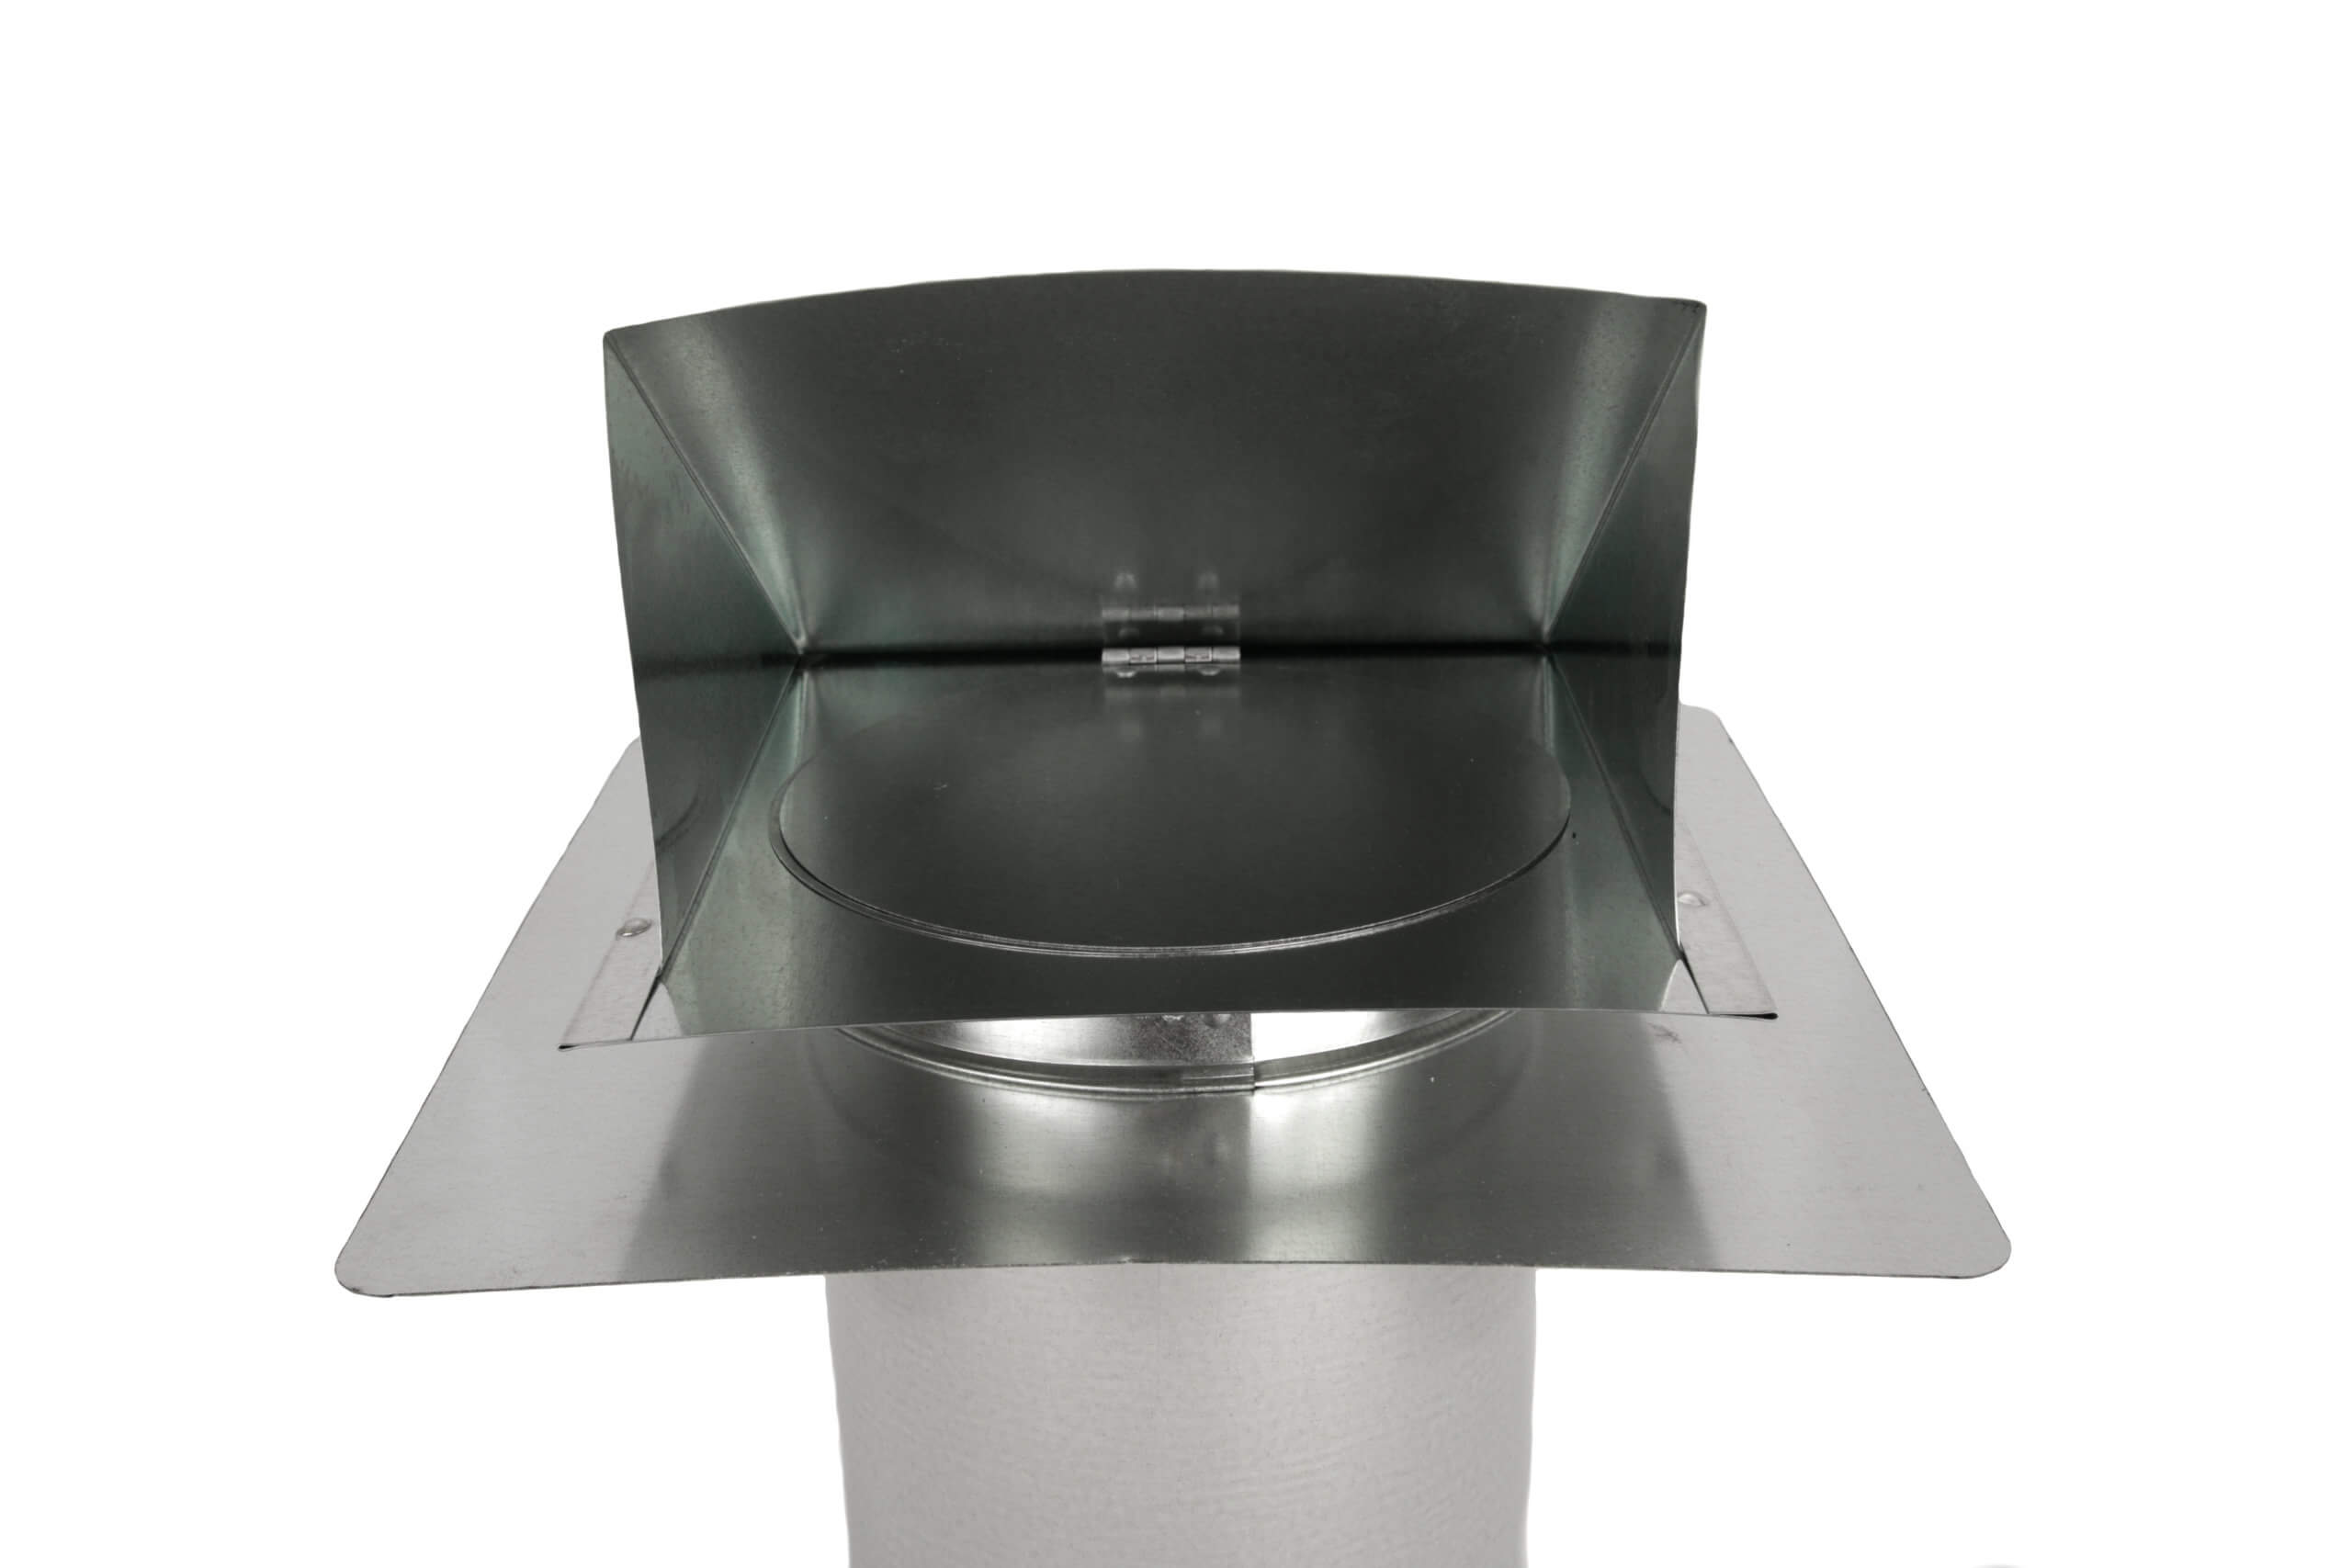 FAMCO Hooded Wall Vent with Screen, Damper, & Stucco Ring - Galvanized Steel (Front View)